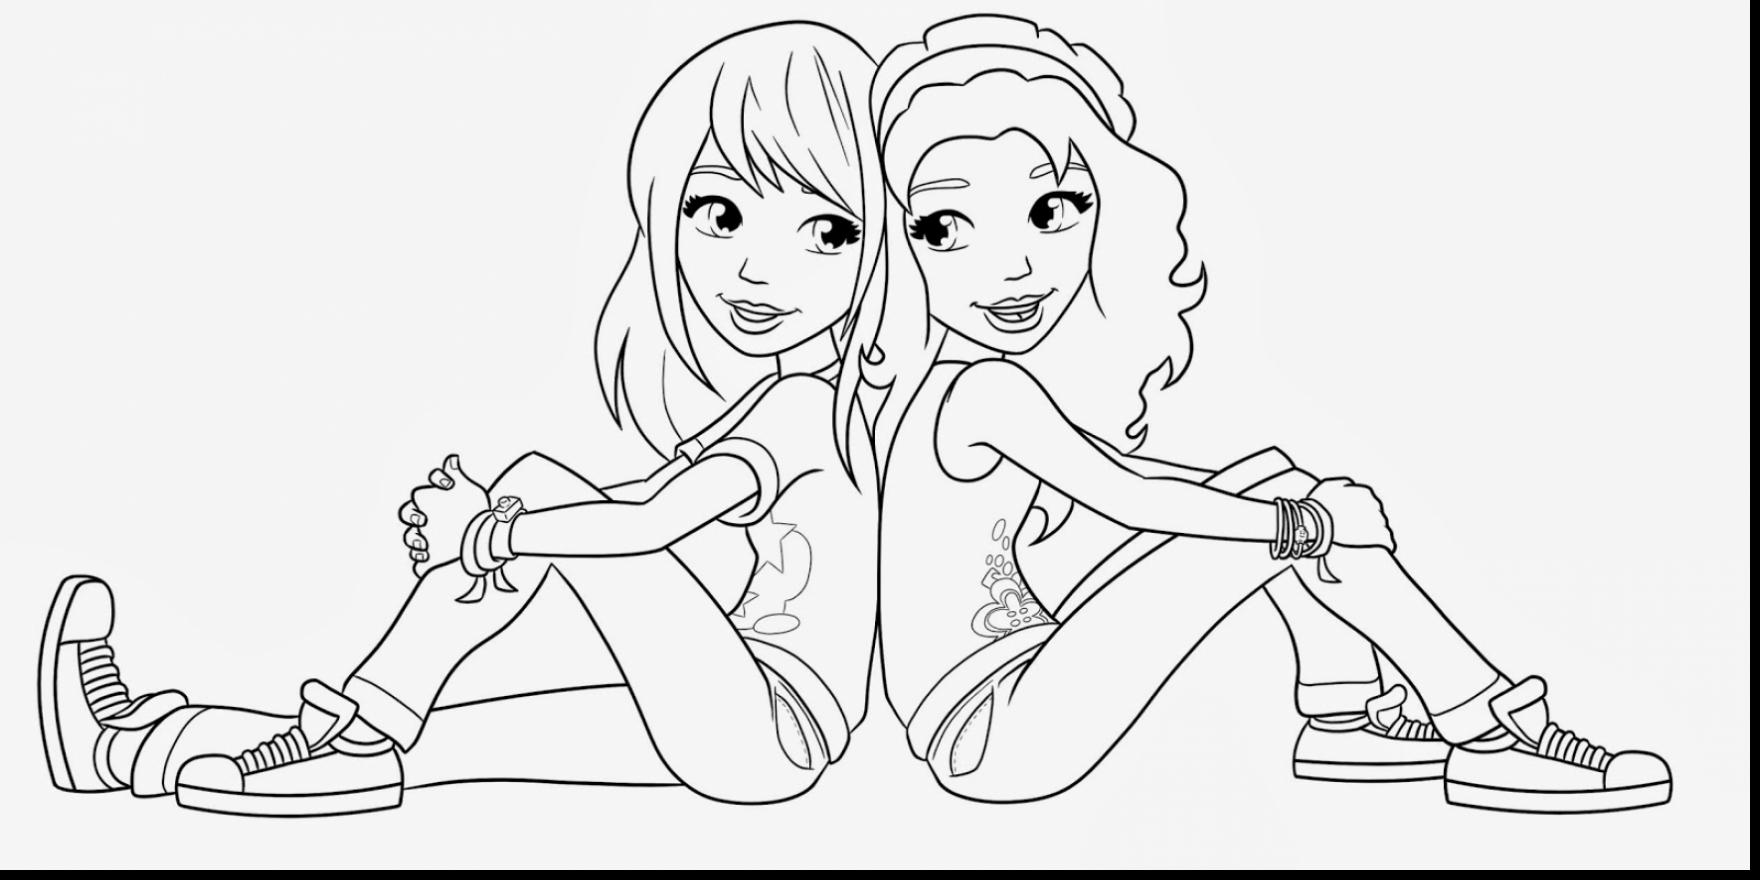 Best Friends Coloring Pages Printable At Getdrawings | Free Download